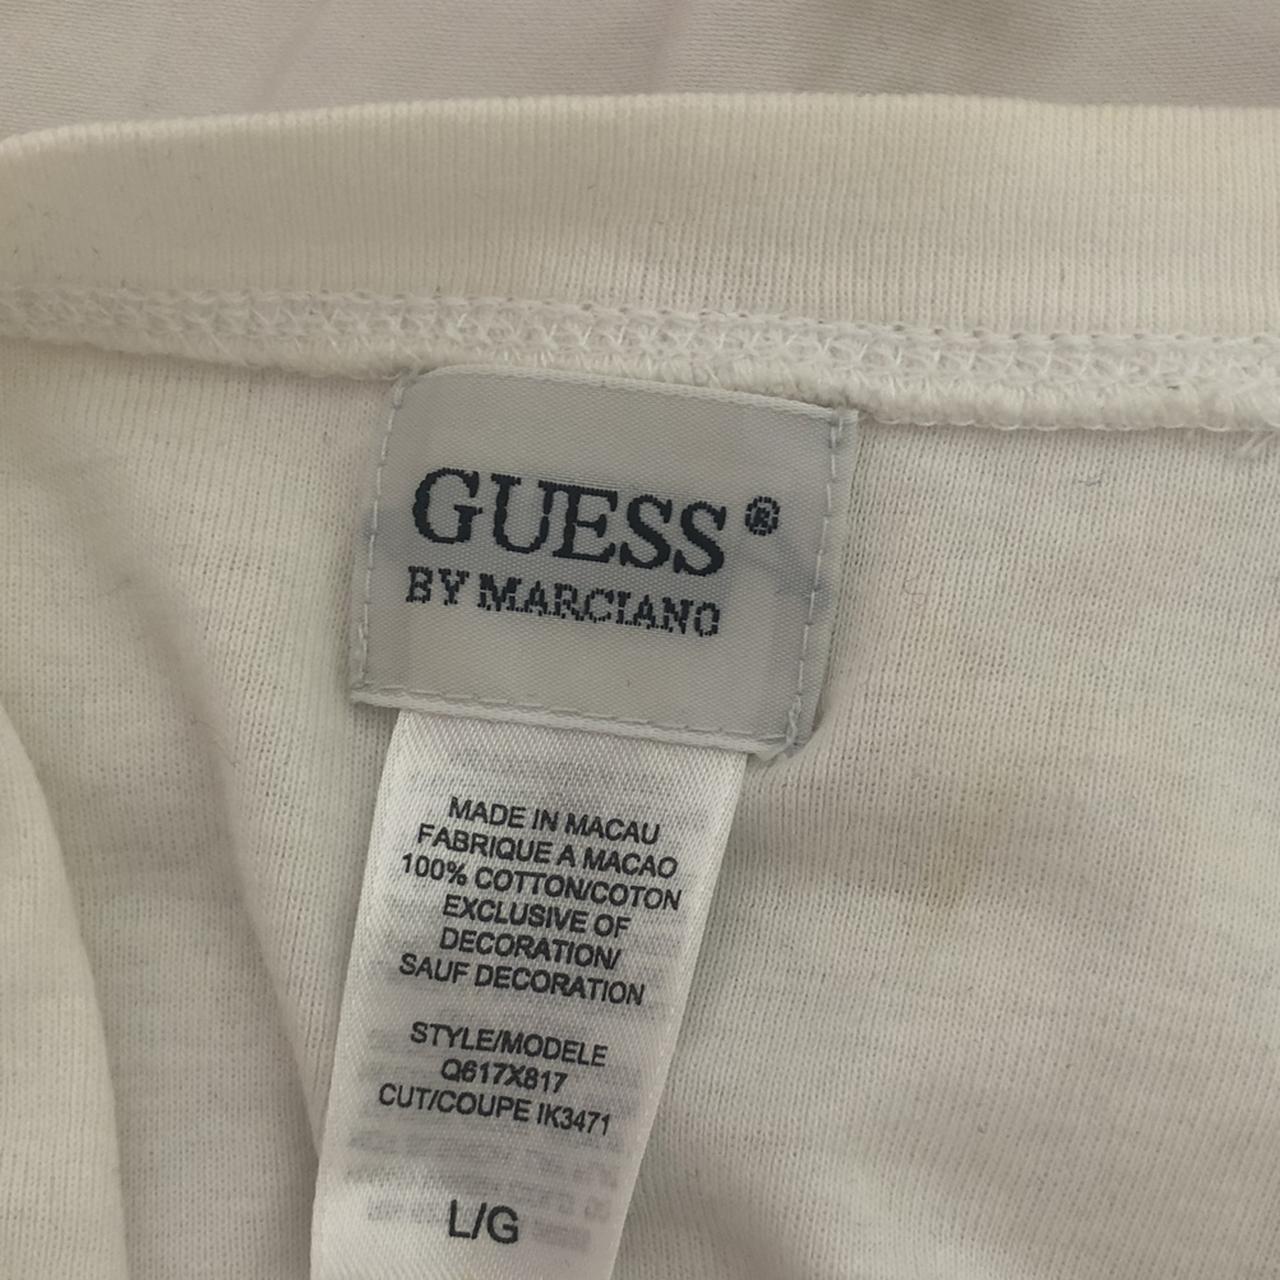 Guess Women's White and Silver T-shirt (3)